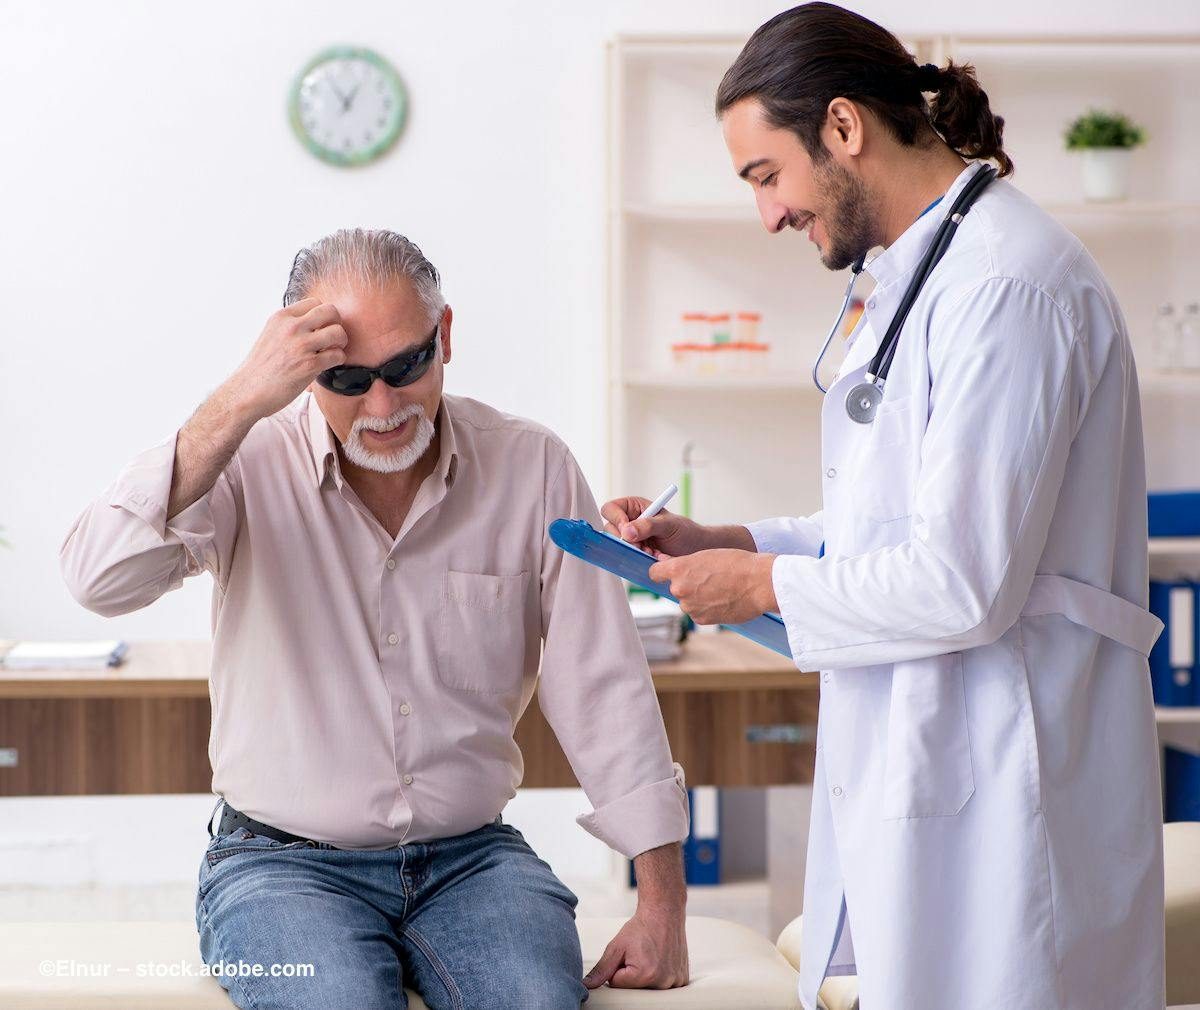 A physician helps a man in sunglasses during an office visit. ©Elnur – stock.adobe.com